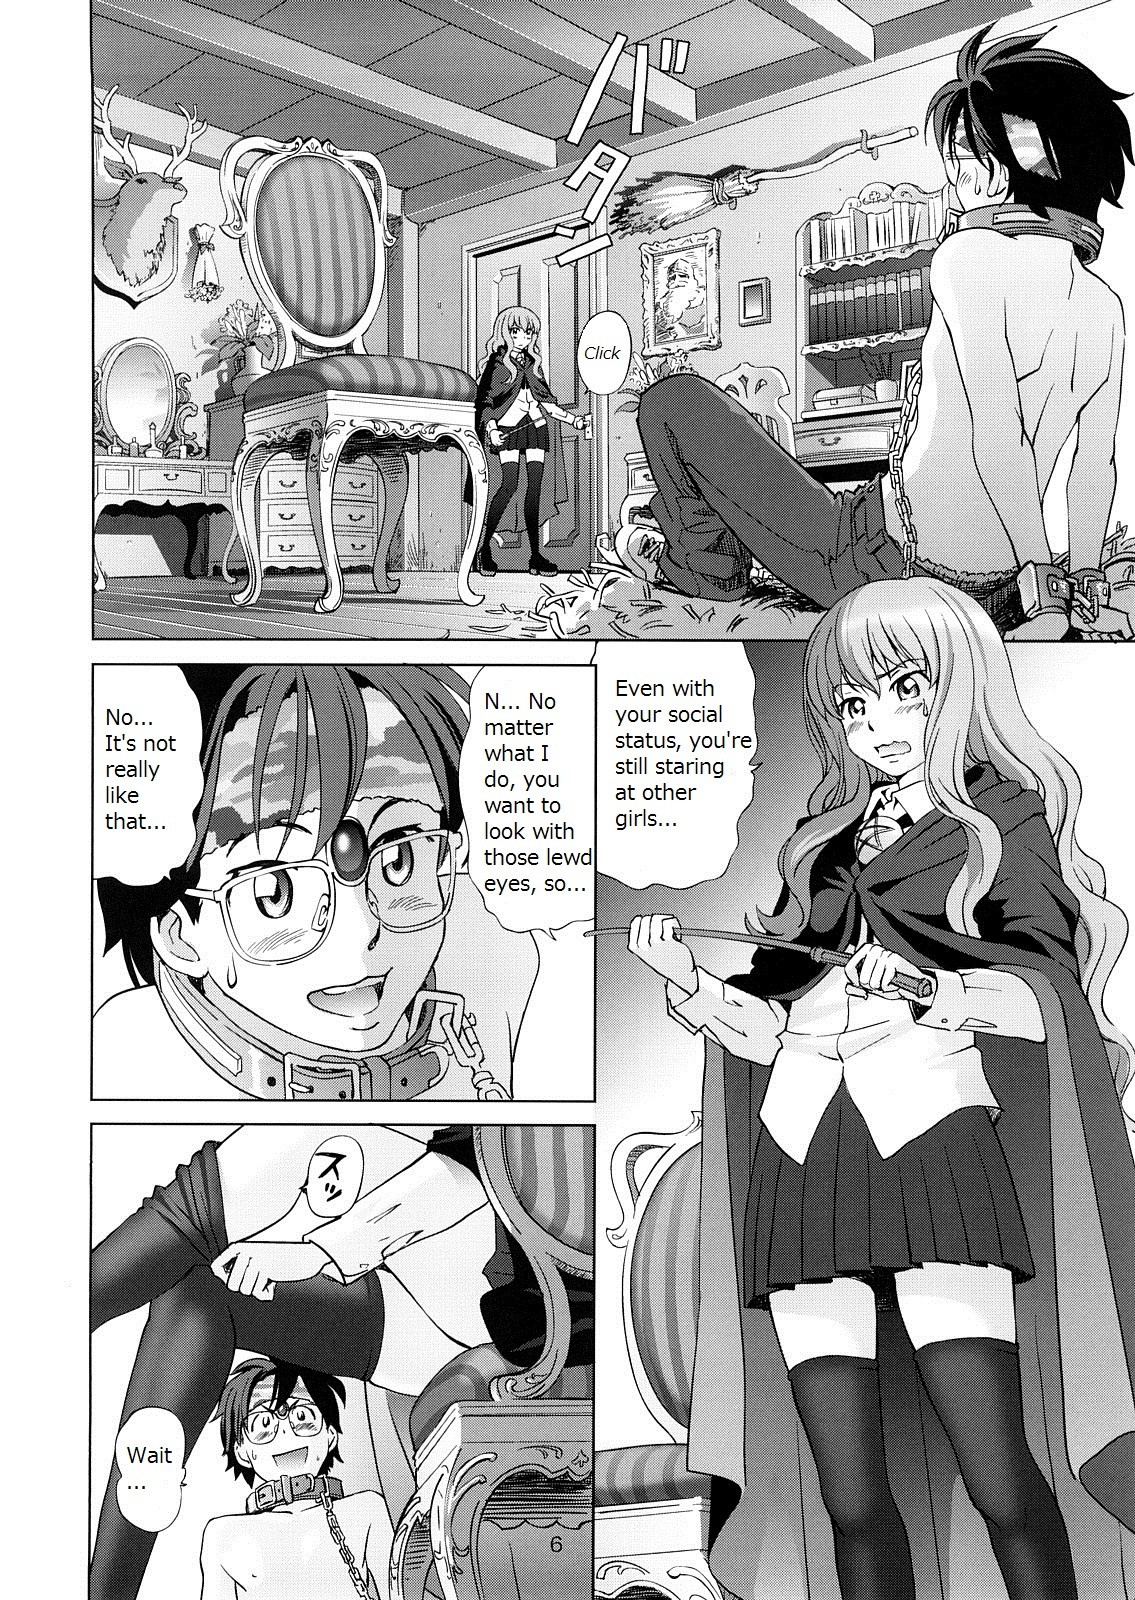 Louise and Her Secret Room hentai manga picture 5